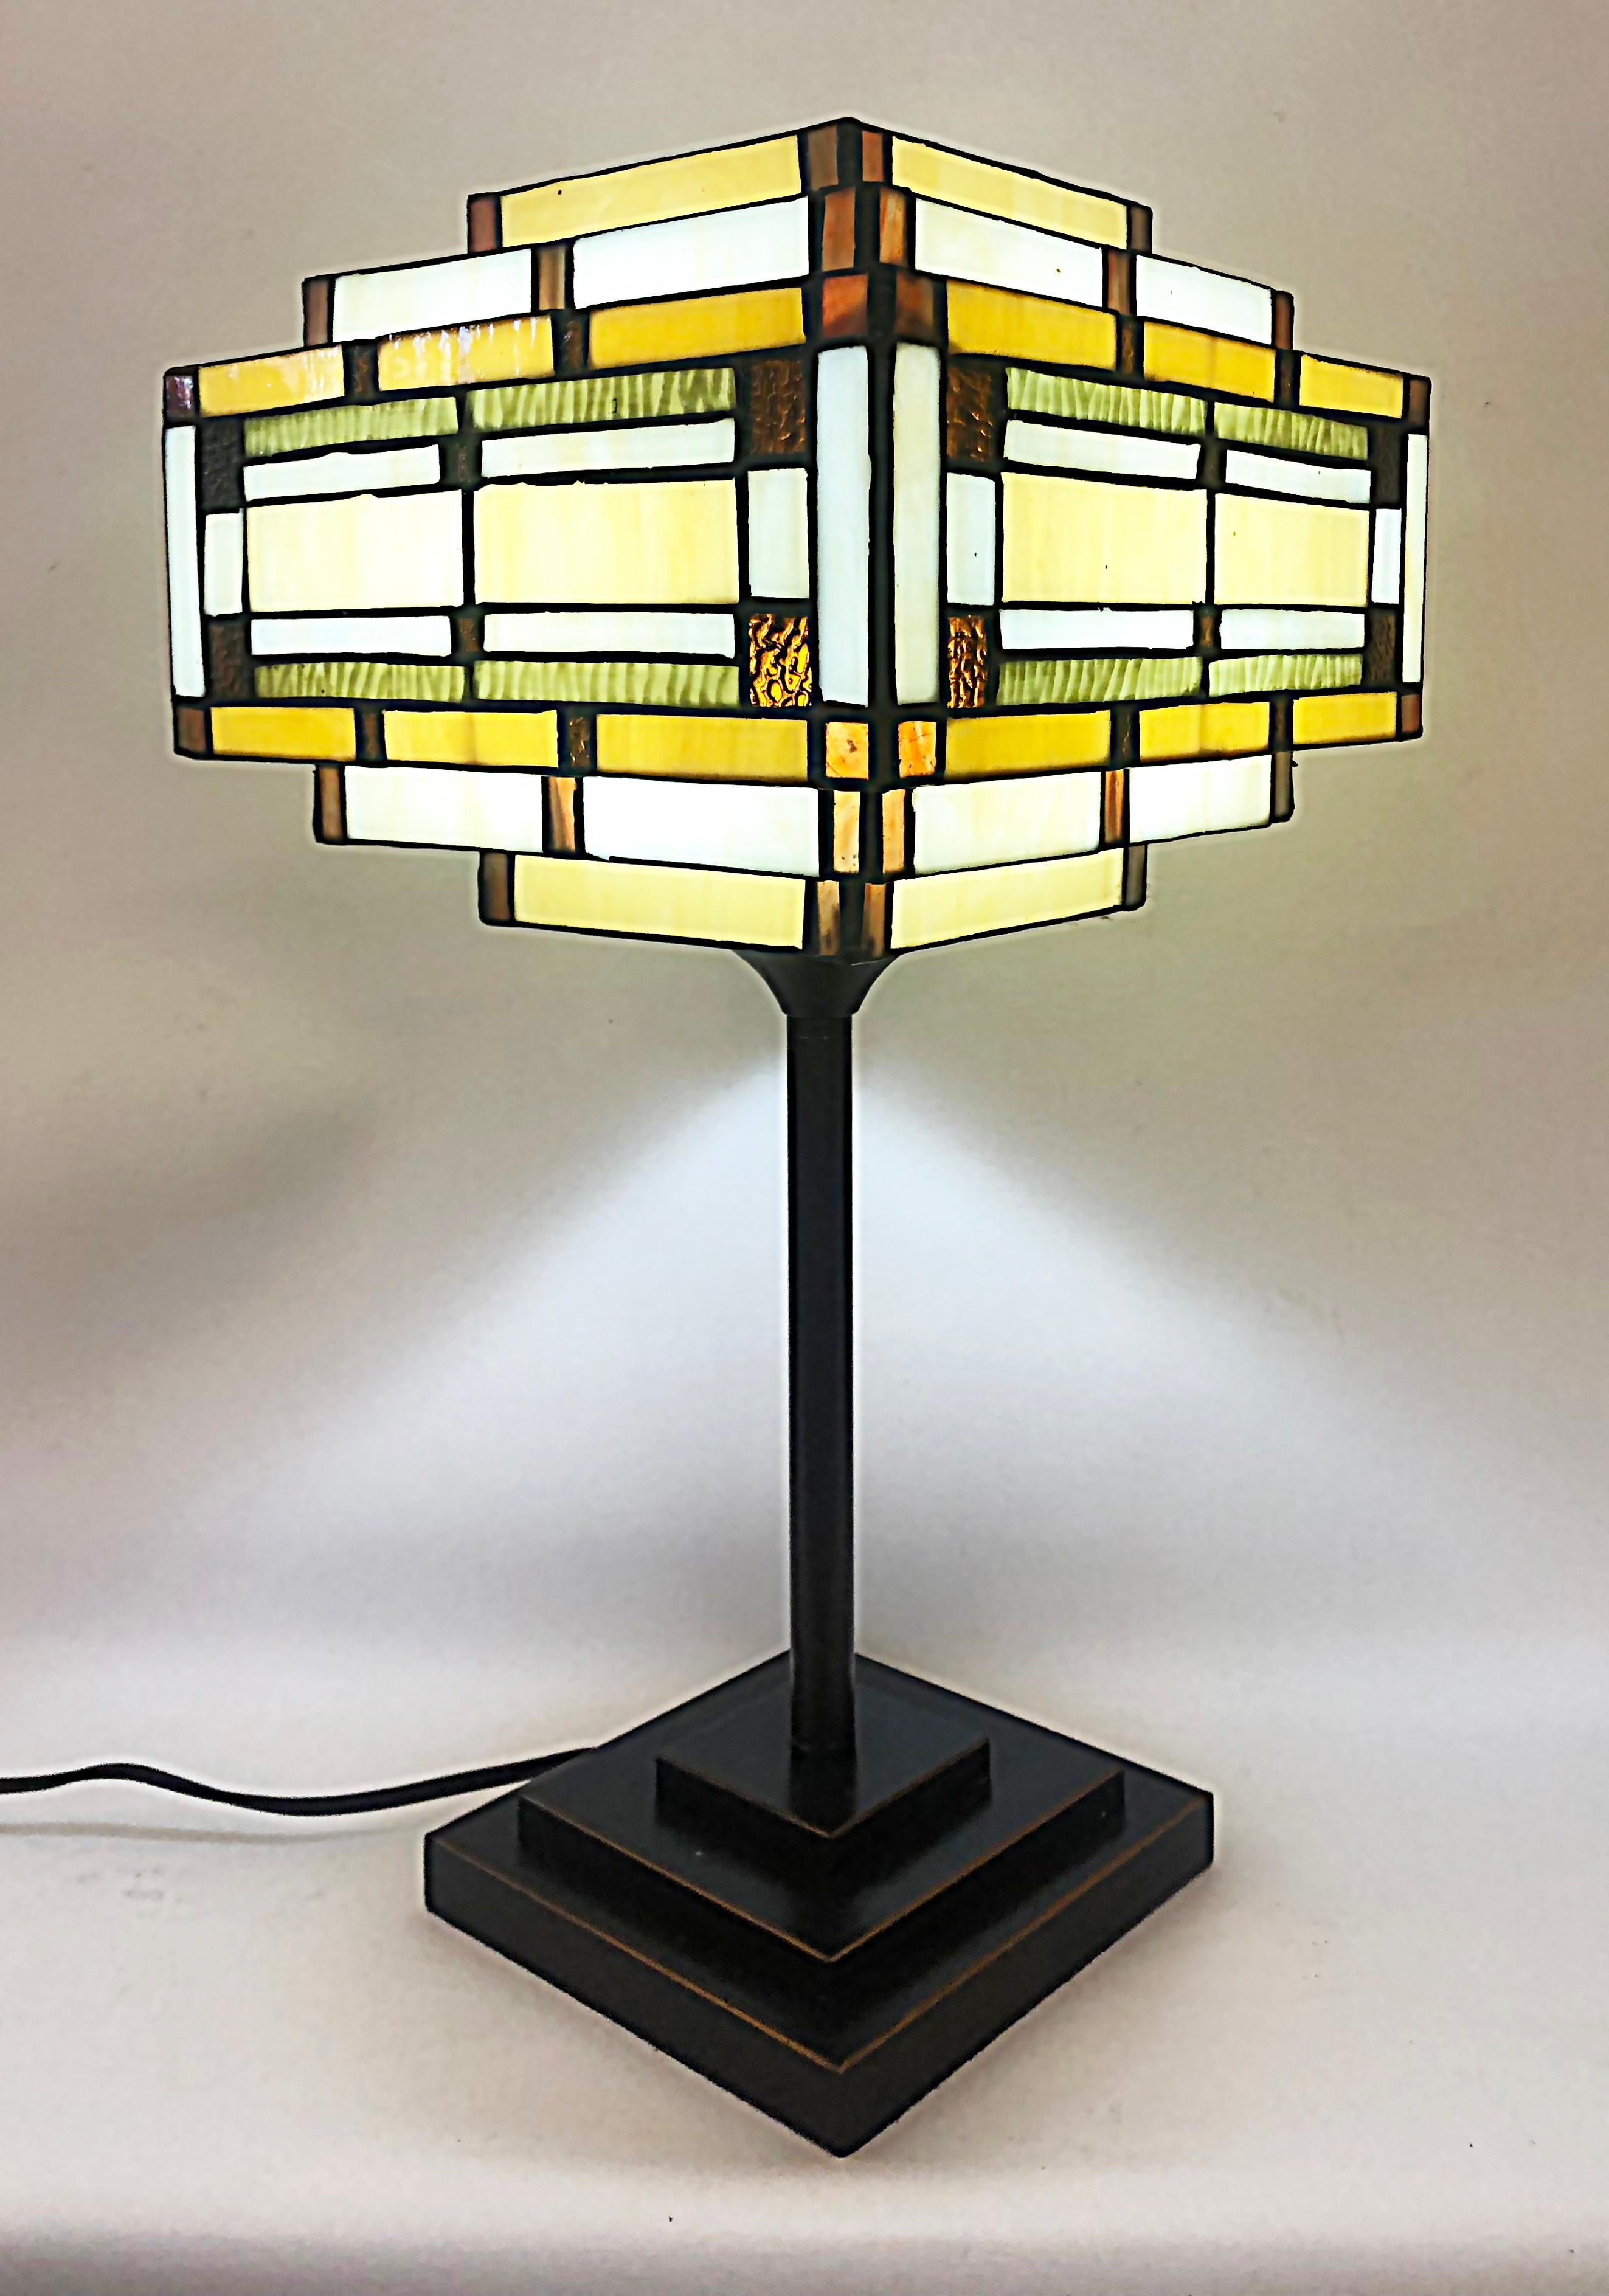 Arts & Crafts Style Table Lamps with Stained Glass Shades, Patinated Metal Bases 1